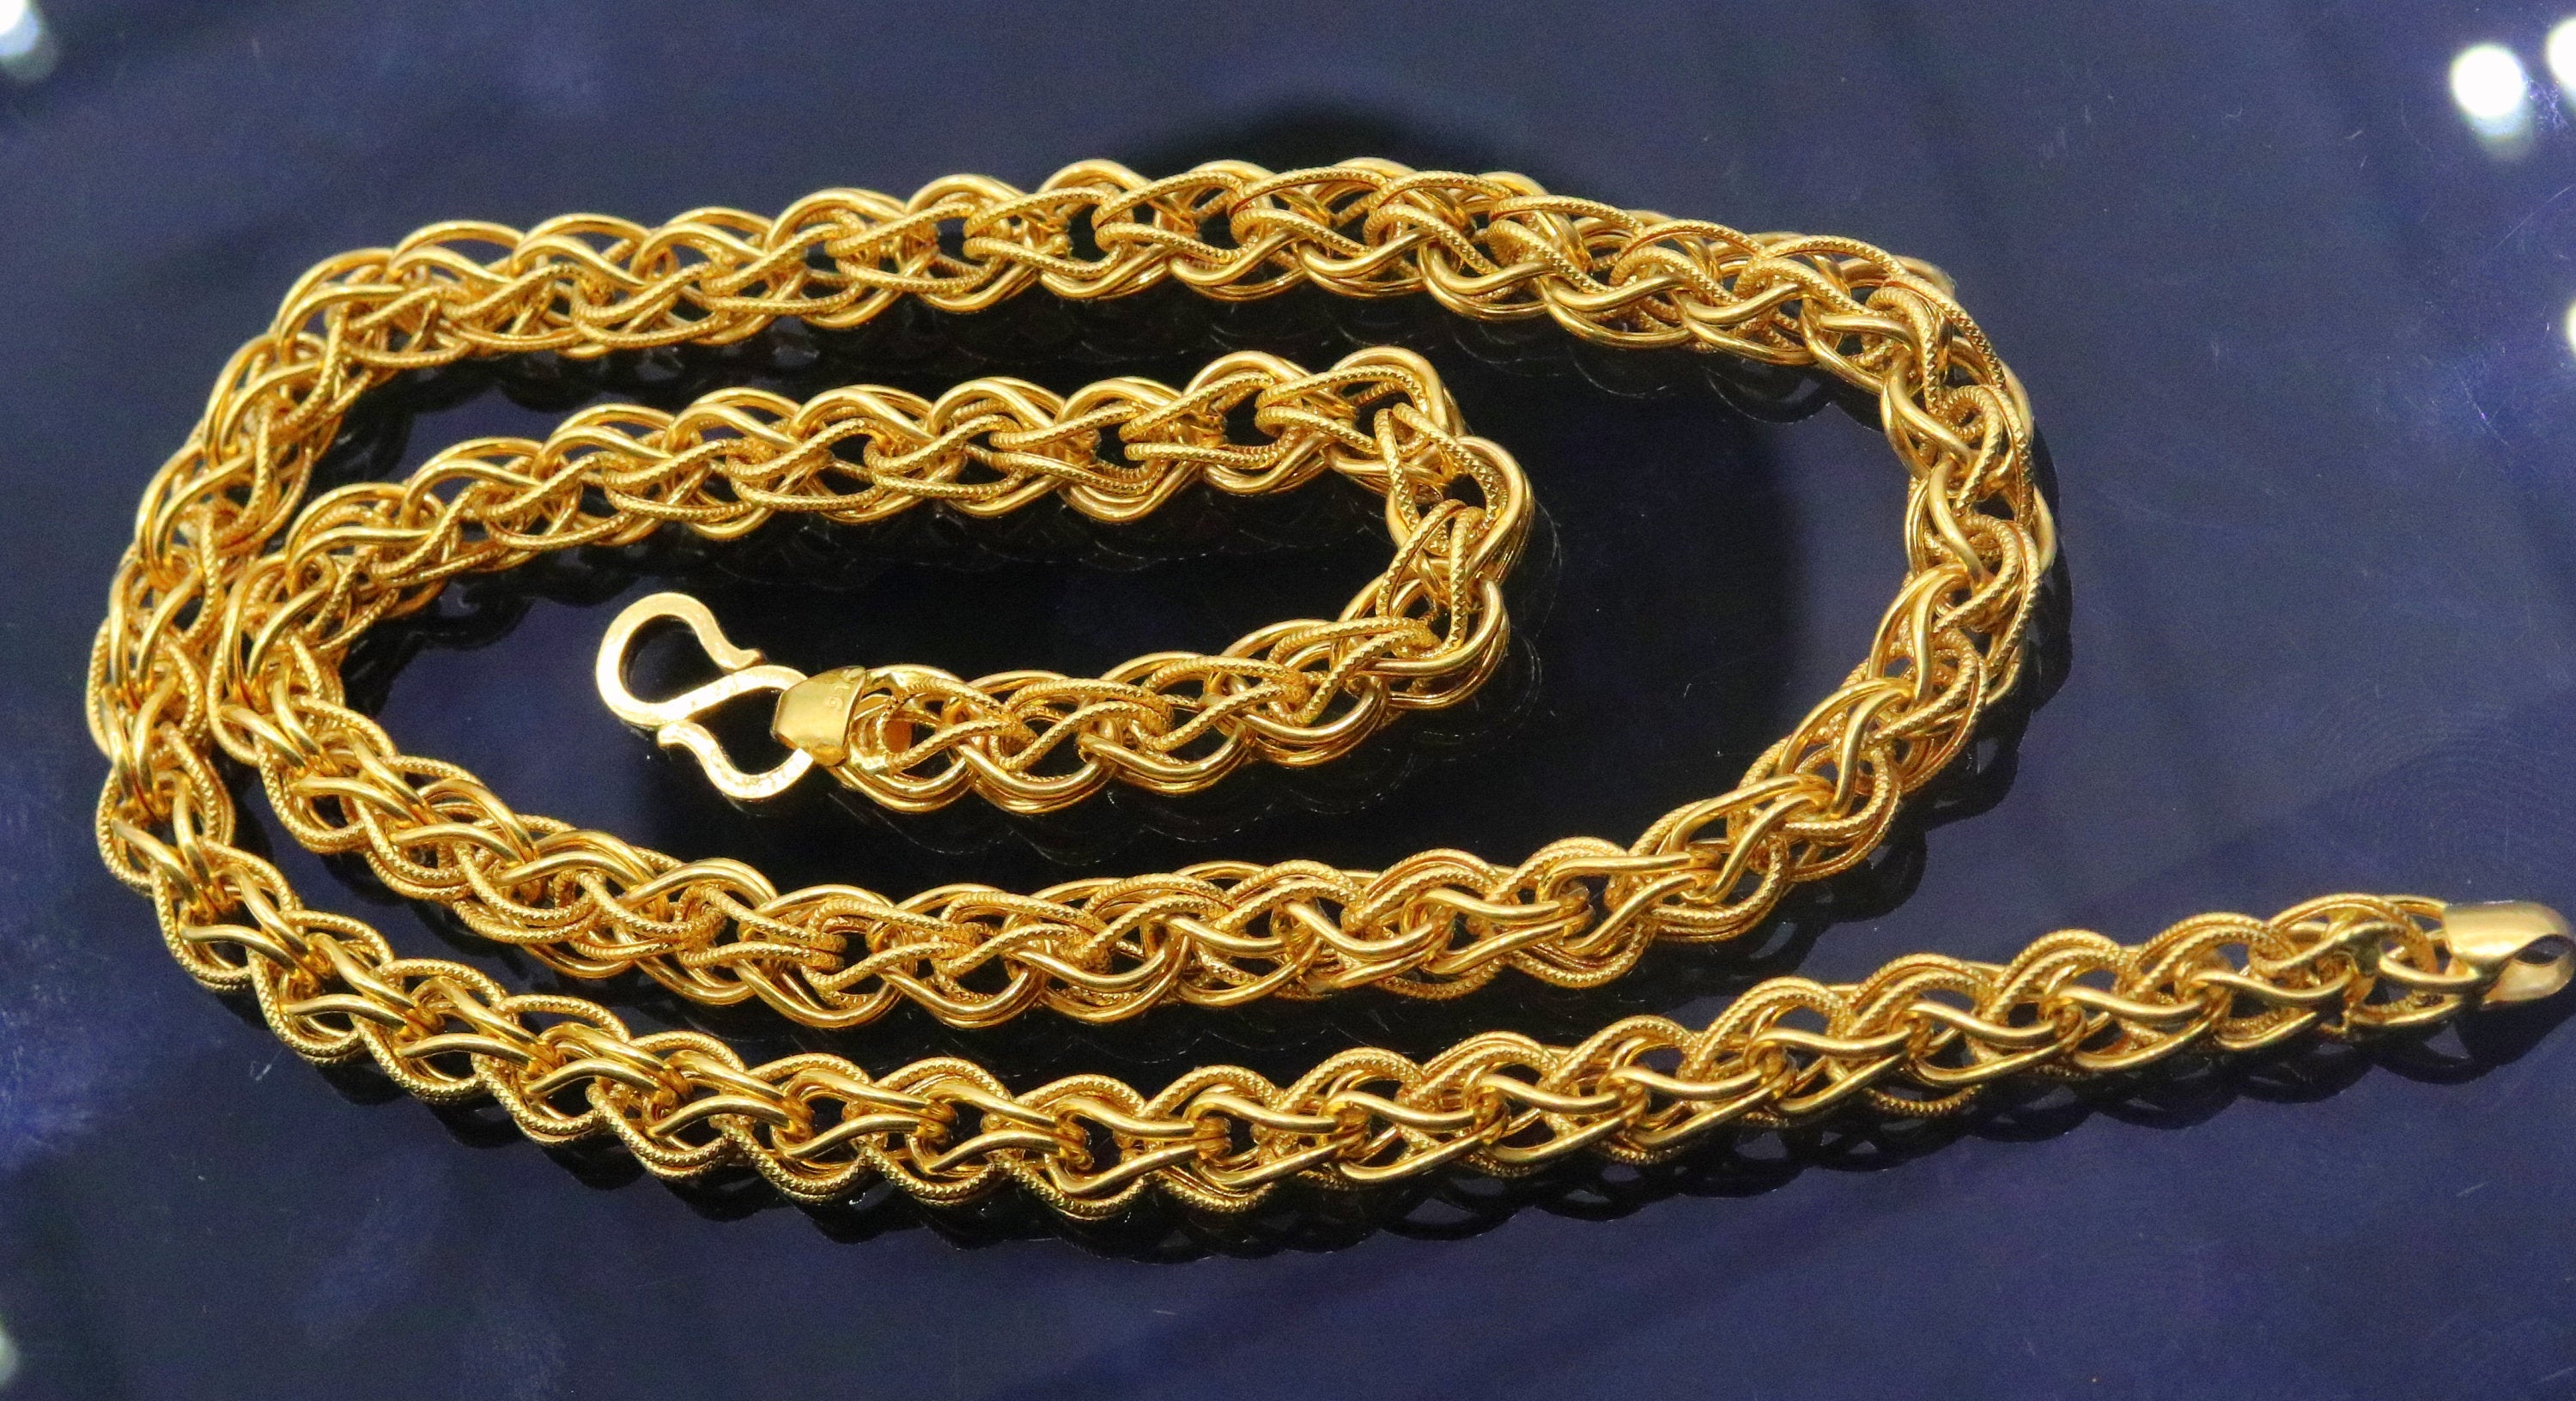 Keanes Jewellers - This 9ct Yellow Gold Square Byzantine Chain Necklace is  an effortlessly luxurious addition to any look and outfit choice from the  Keanes Gold Jewellery Collection. Featured Item: 05-18-023 €925 | Facebook